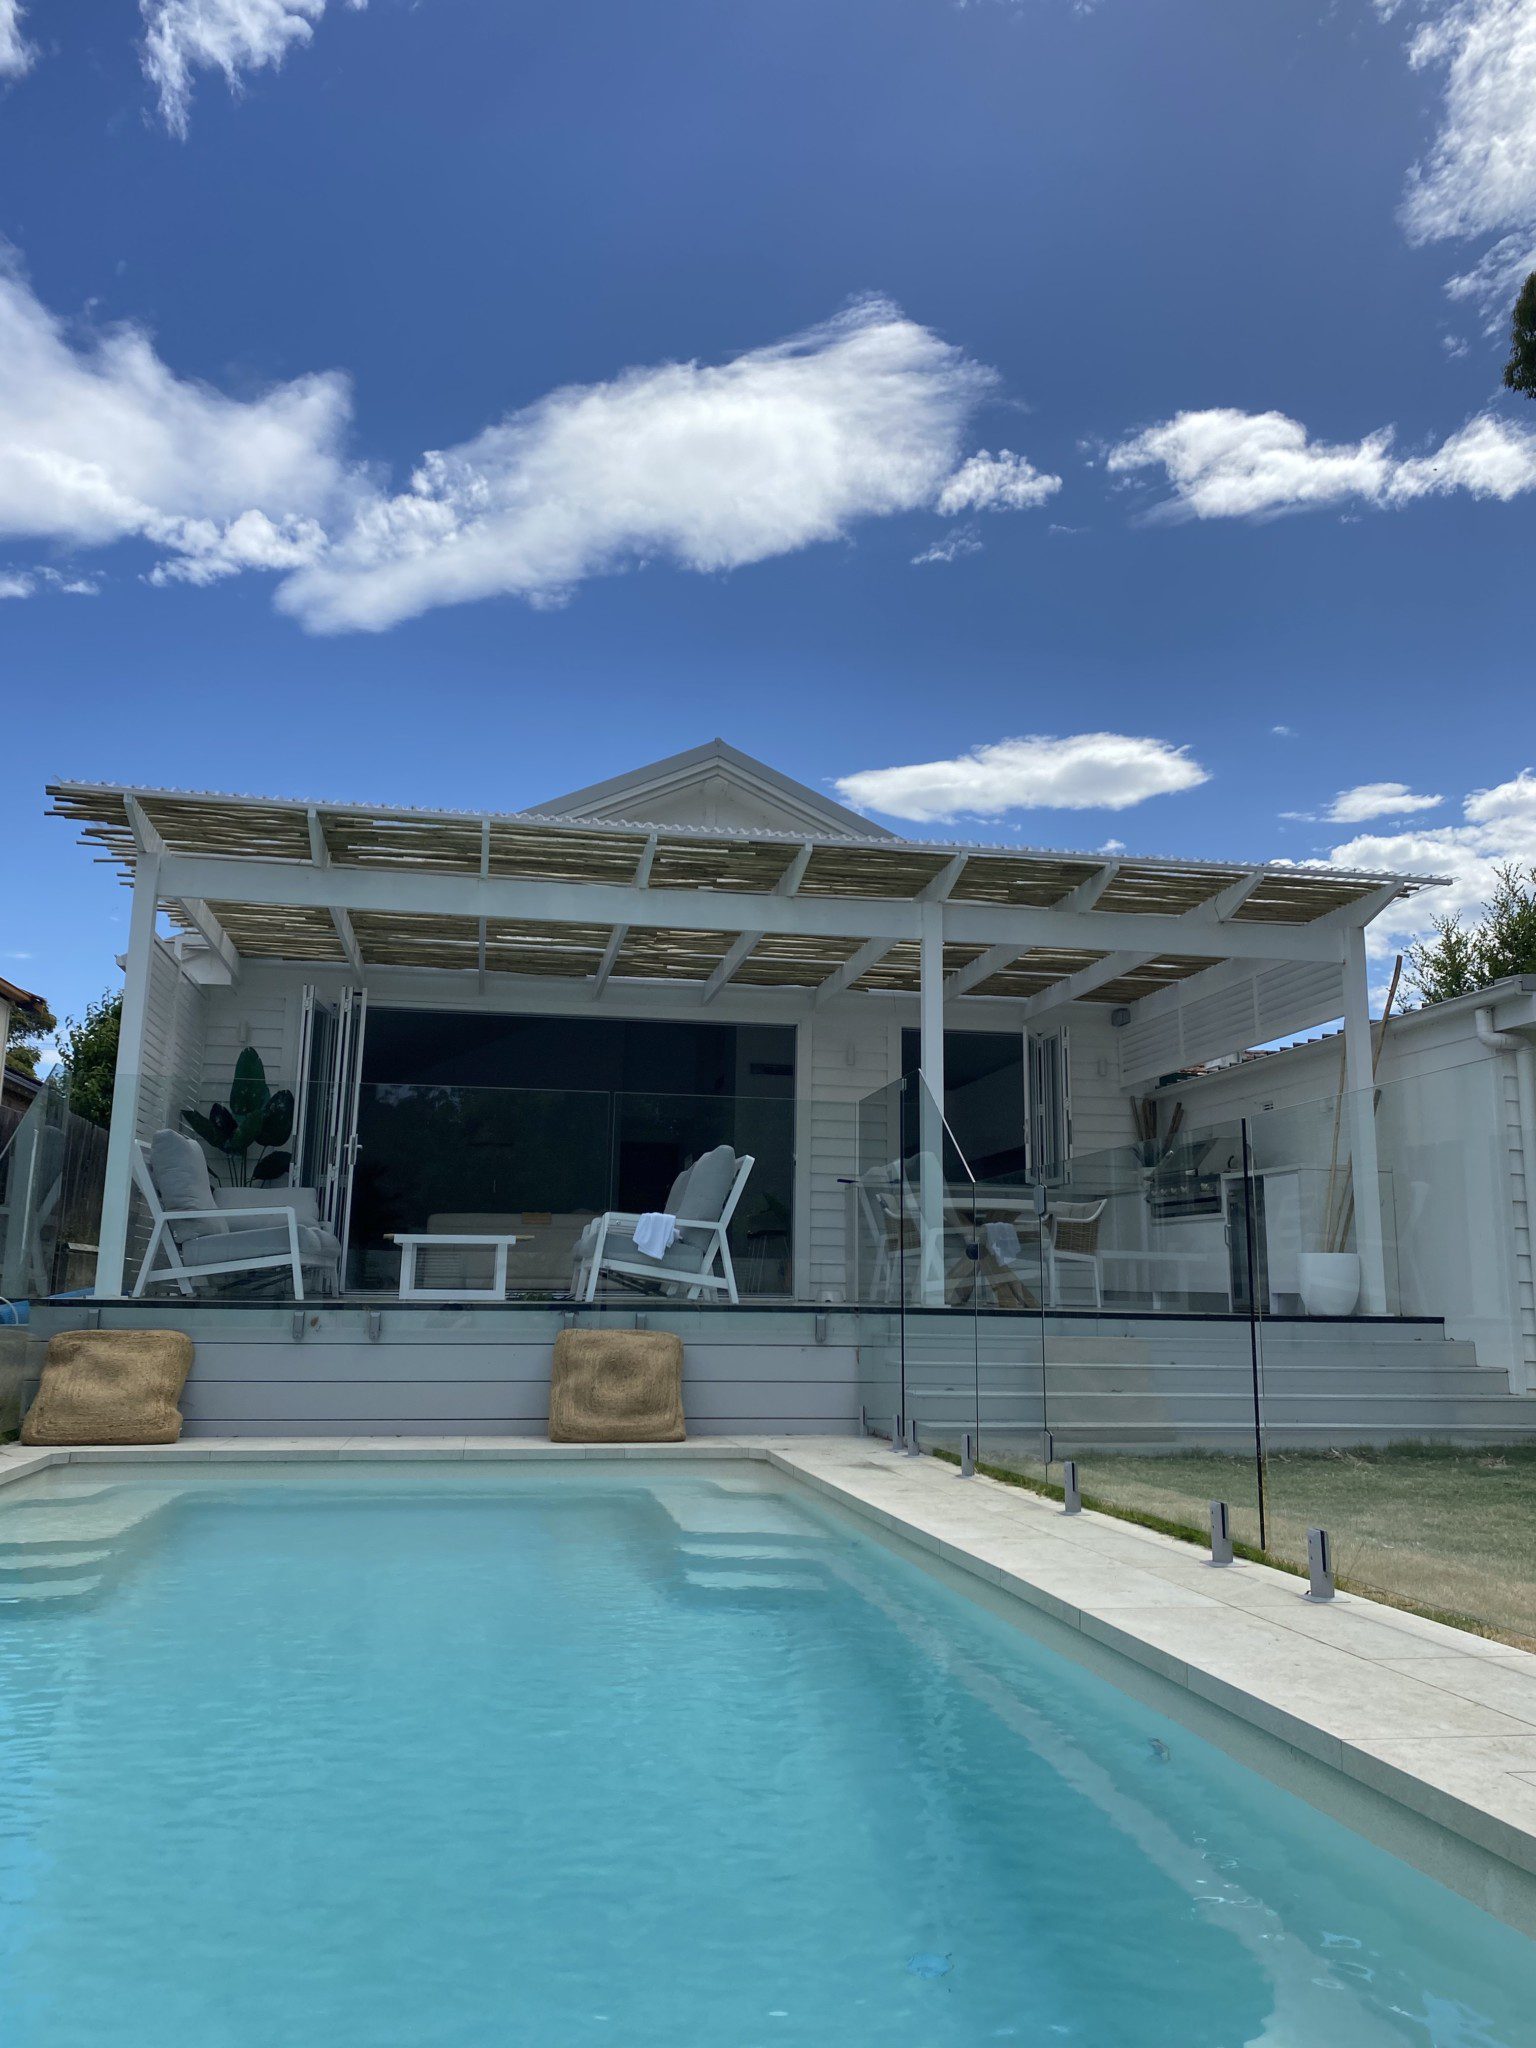 Holiday in Haberfield – Open Plan Out to Palms, Pool, Deck & Garden